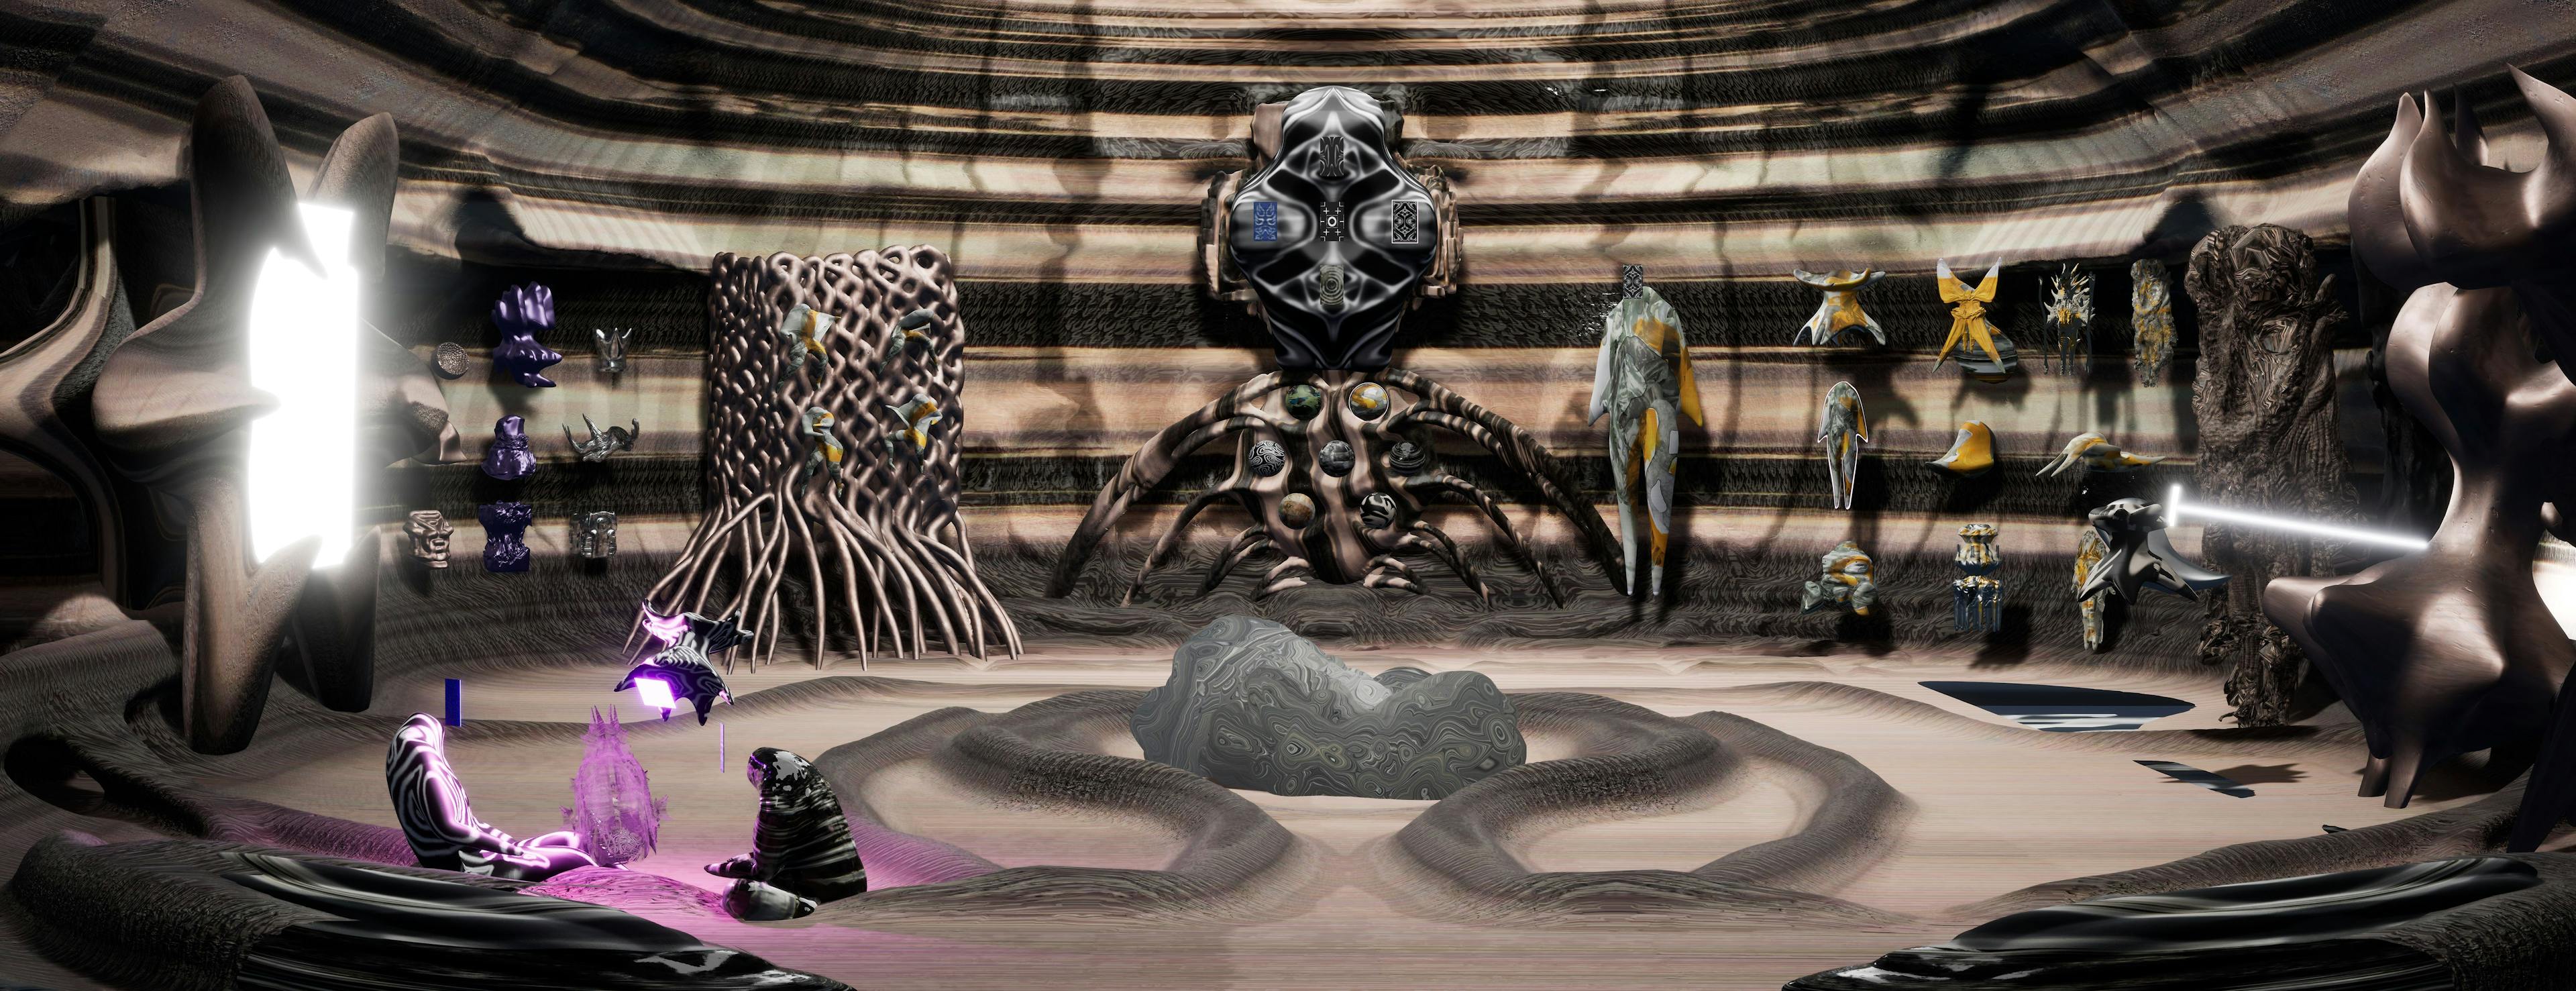 A digital rendering of a rounded interior space with an undulating floor with various garments, tools, and large, otherworldly architectural forms lining the perimeter.